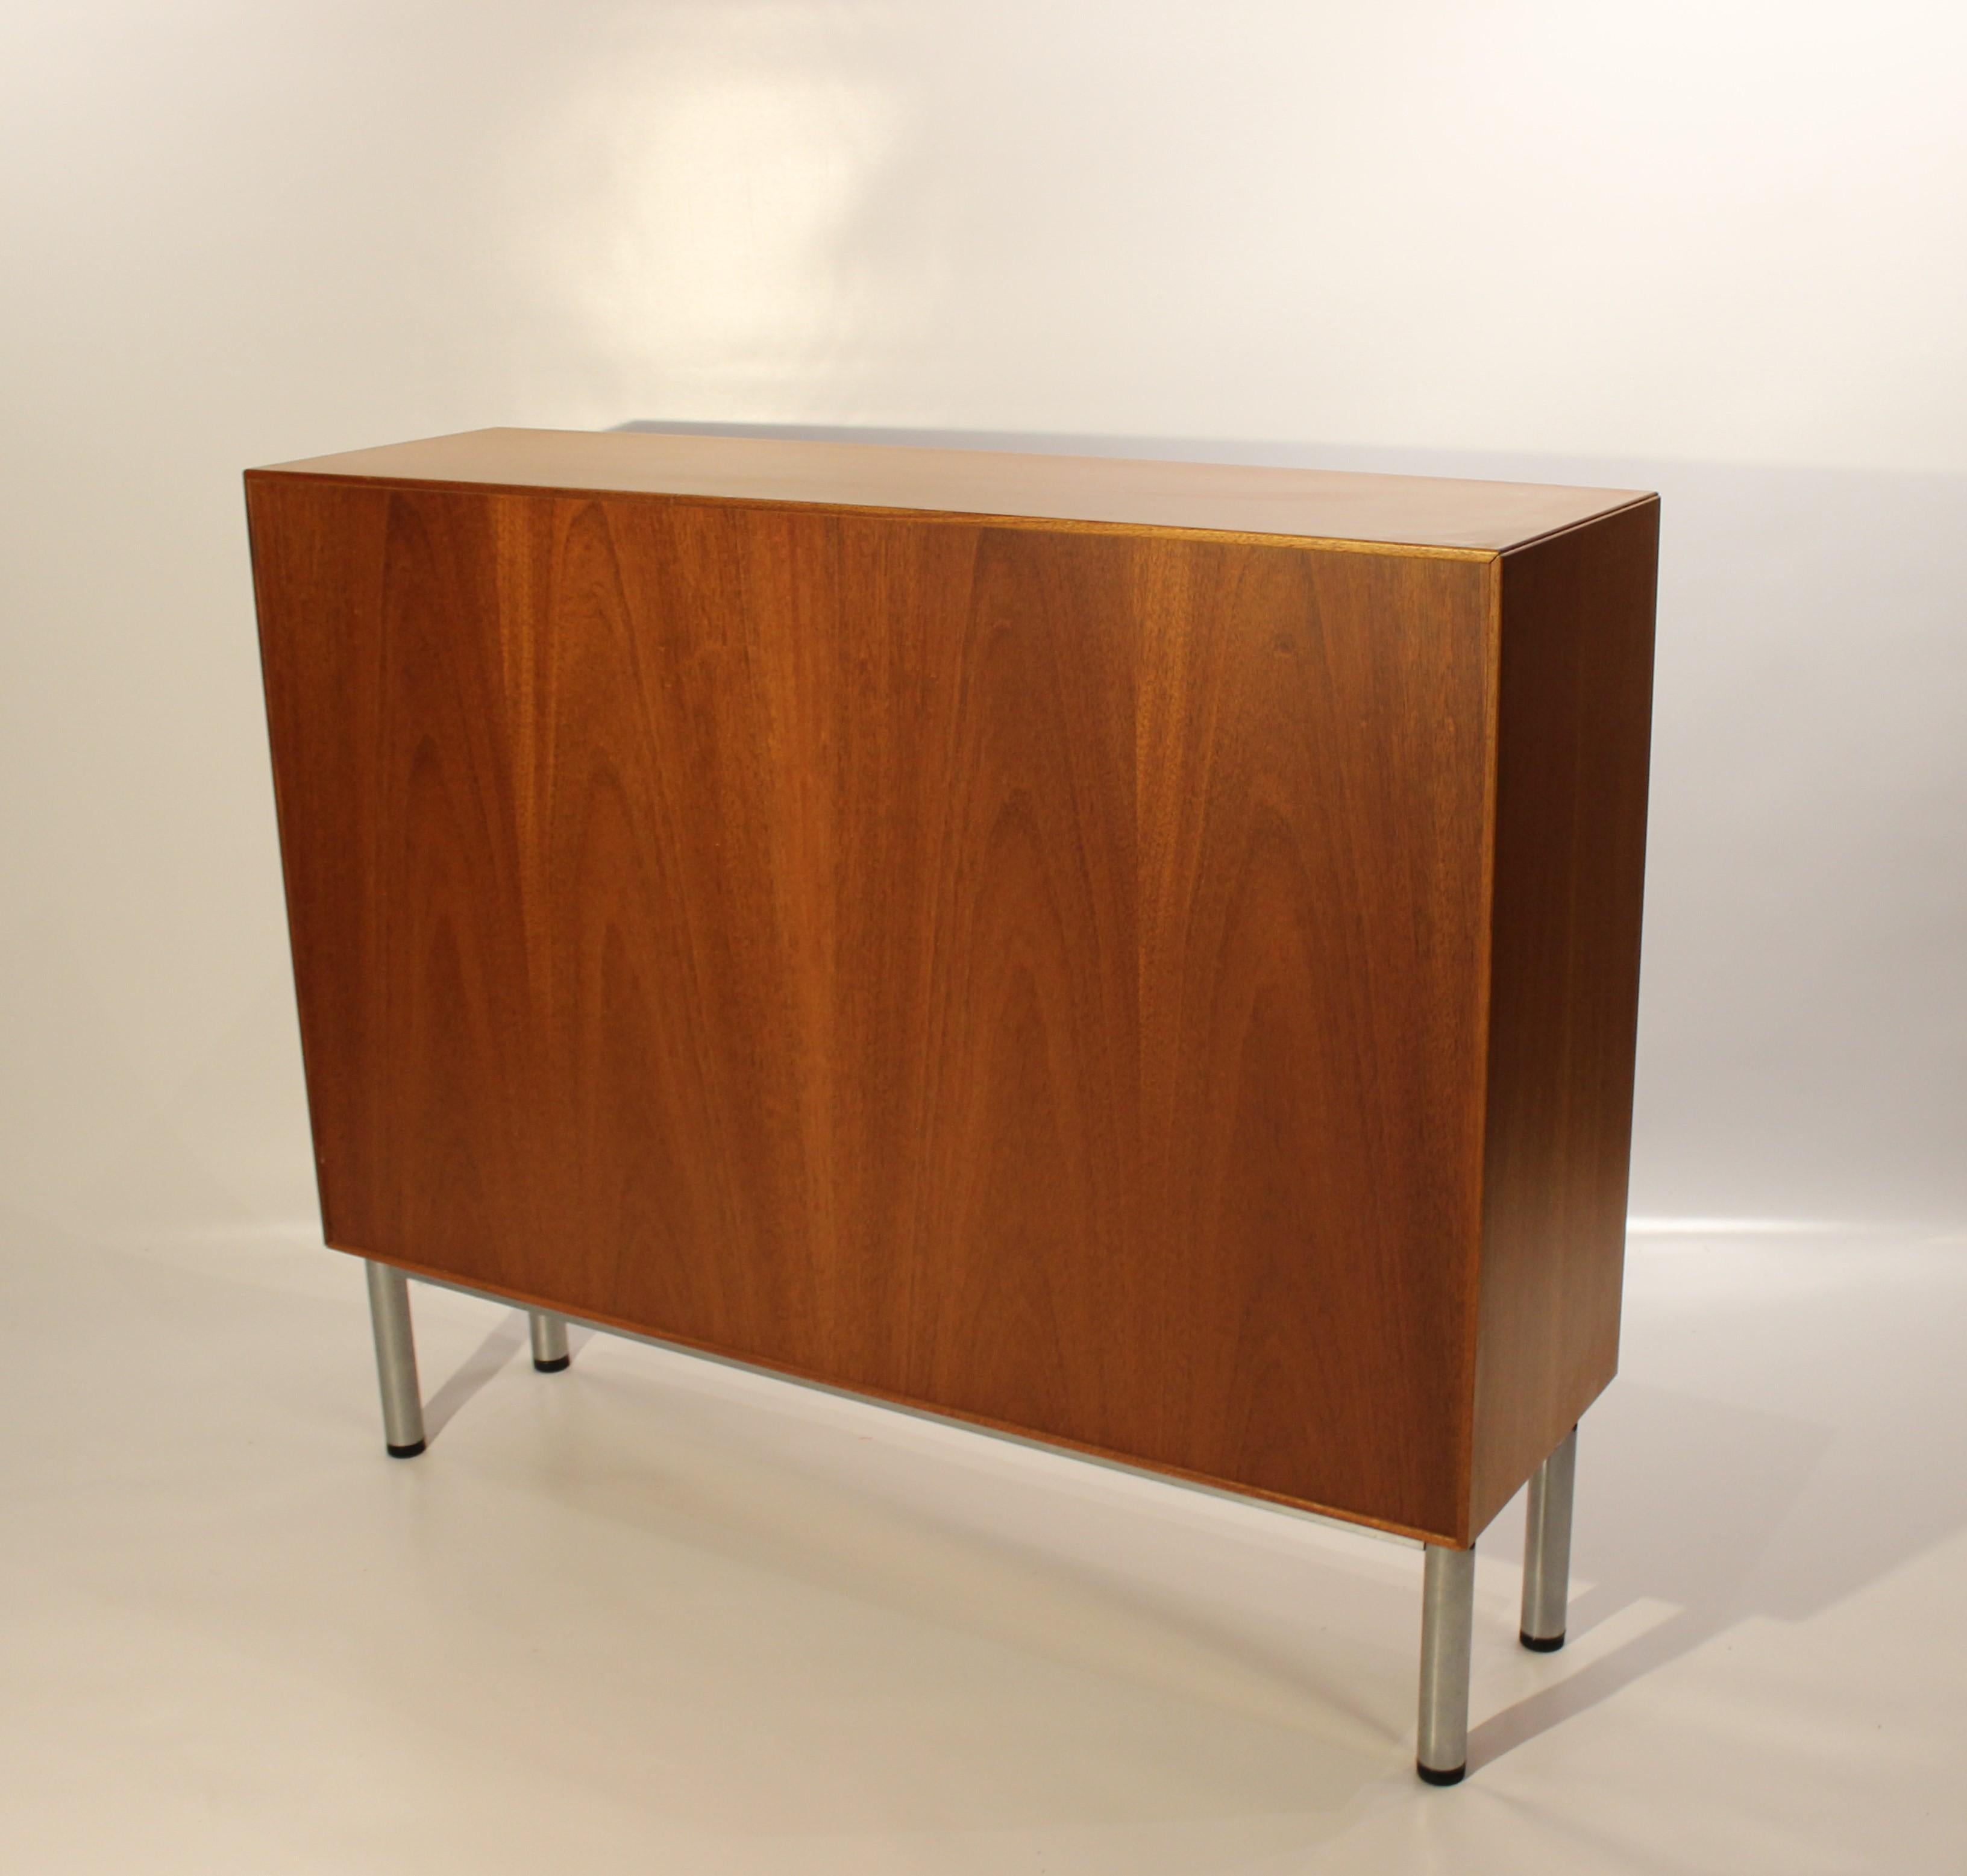 Mid-20th Century Bookcase of Light Mahogany and Danish Design from the 1960s